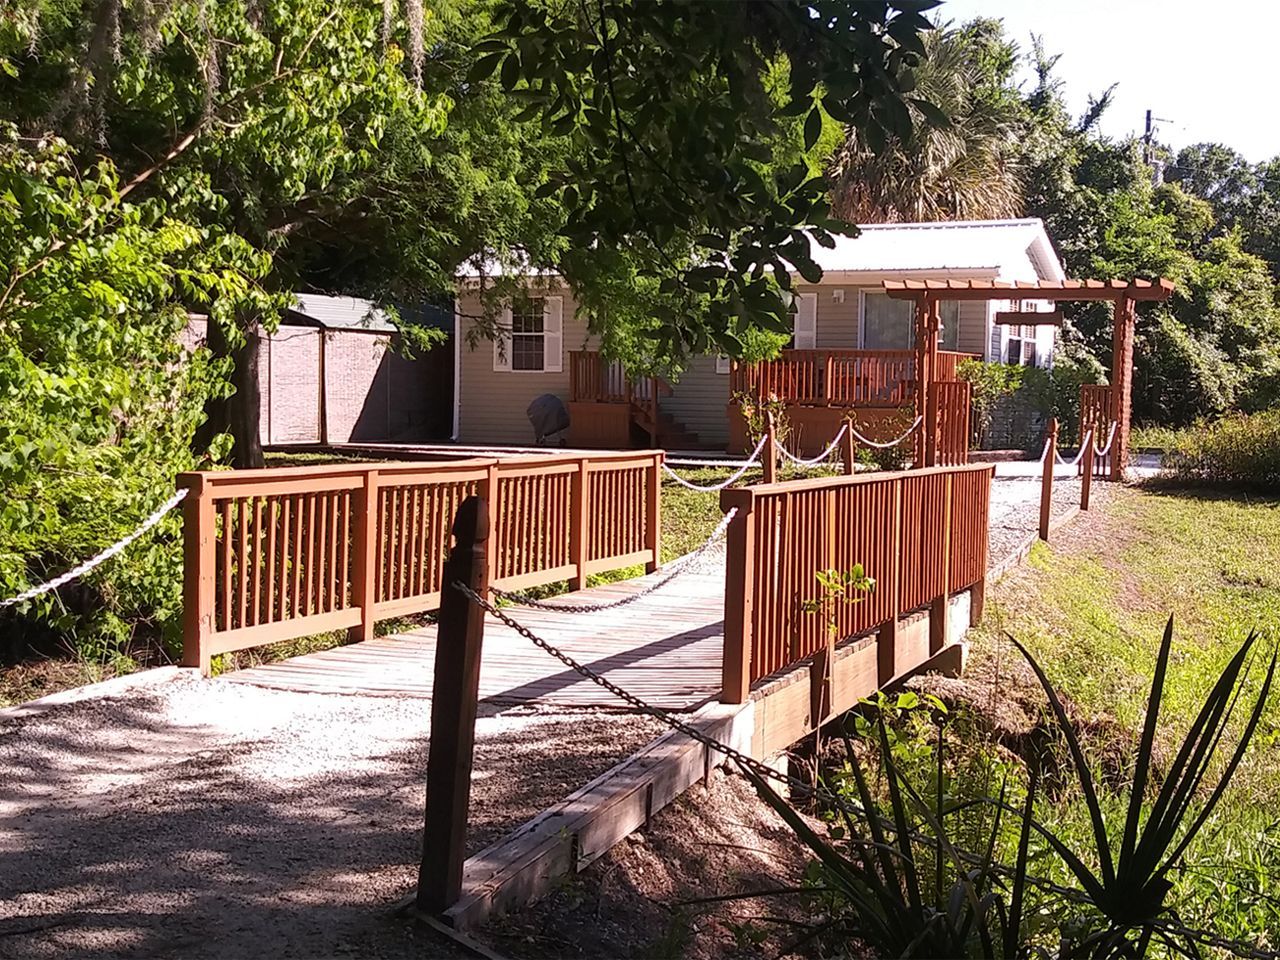 a wooden bridge over a dirt road leads to a house